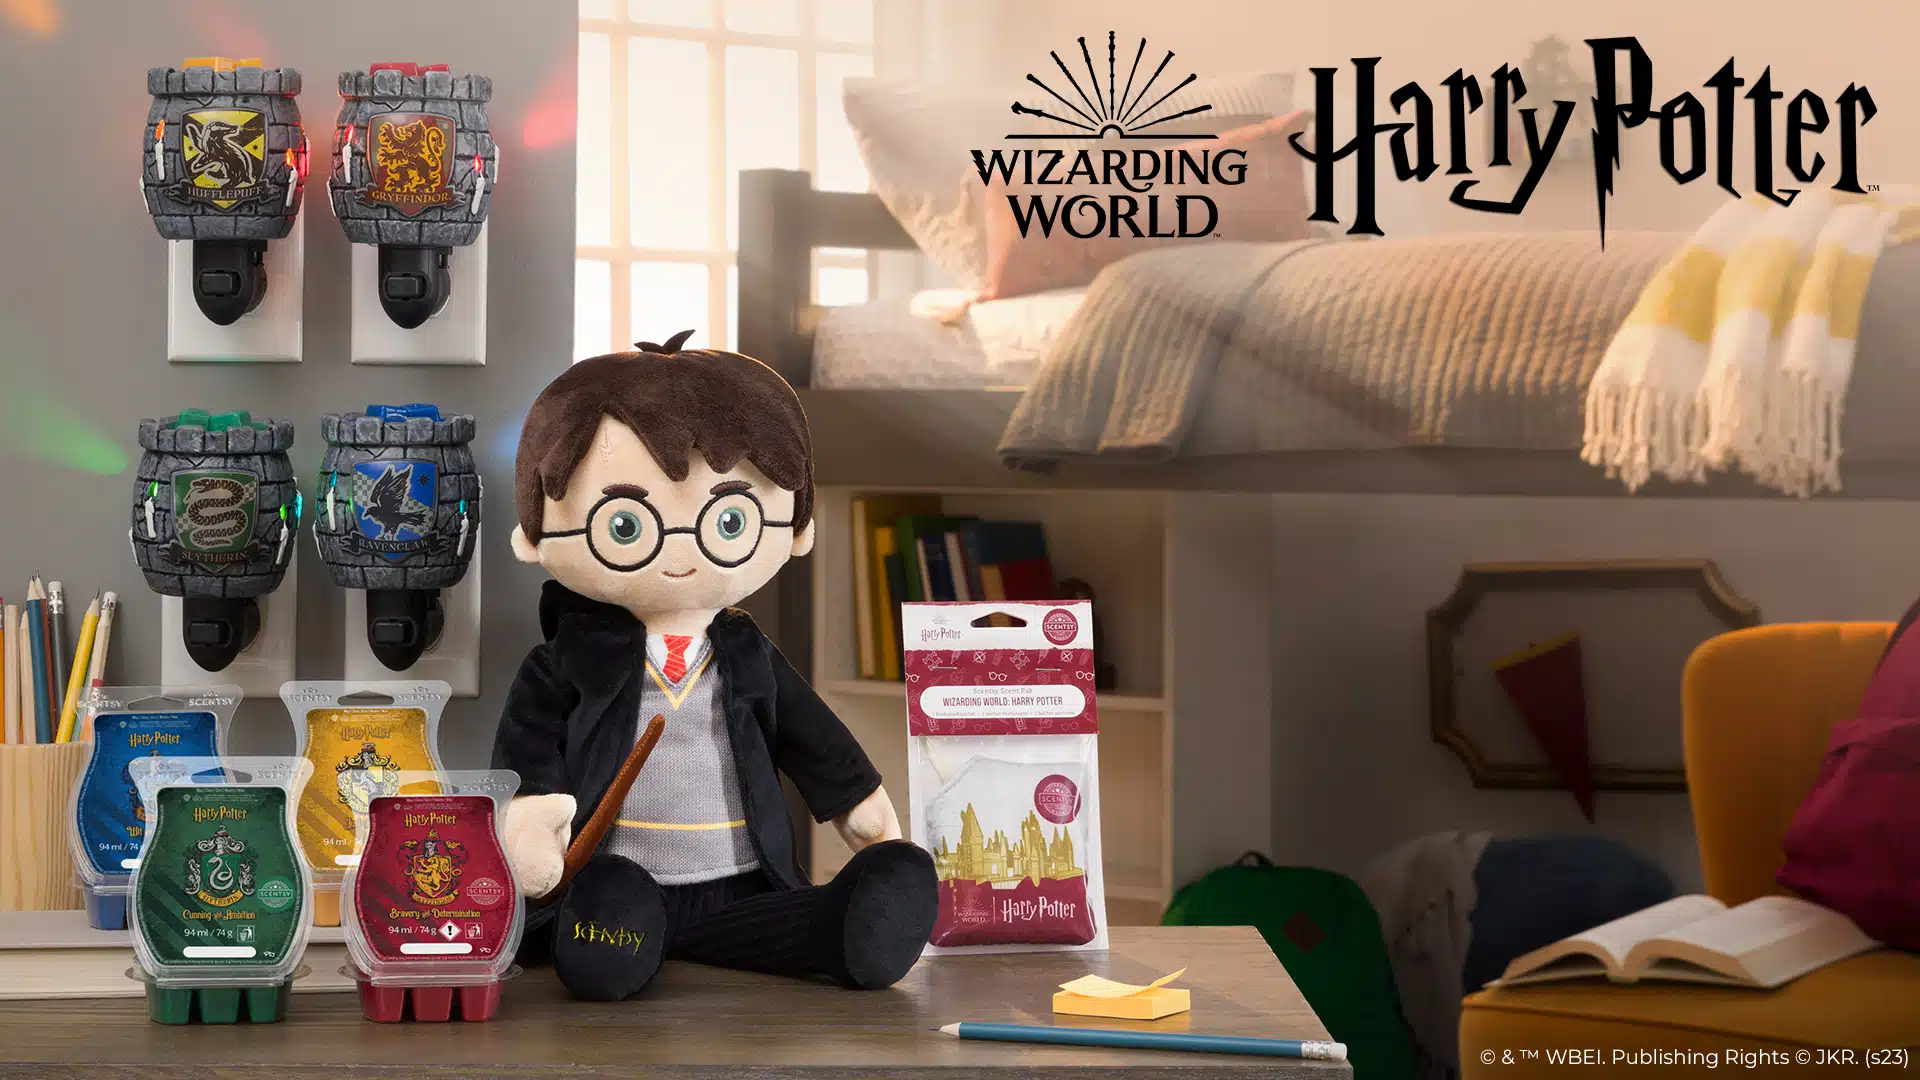 Scentsy Harry Potter™ Wax Collection Box Set